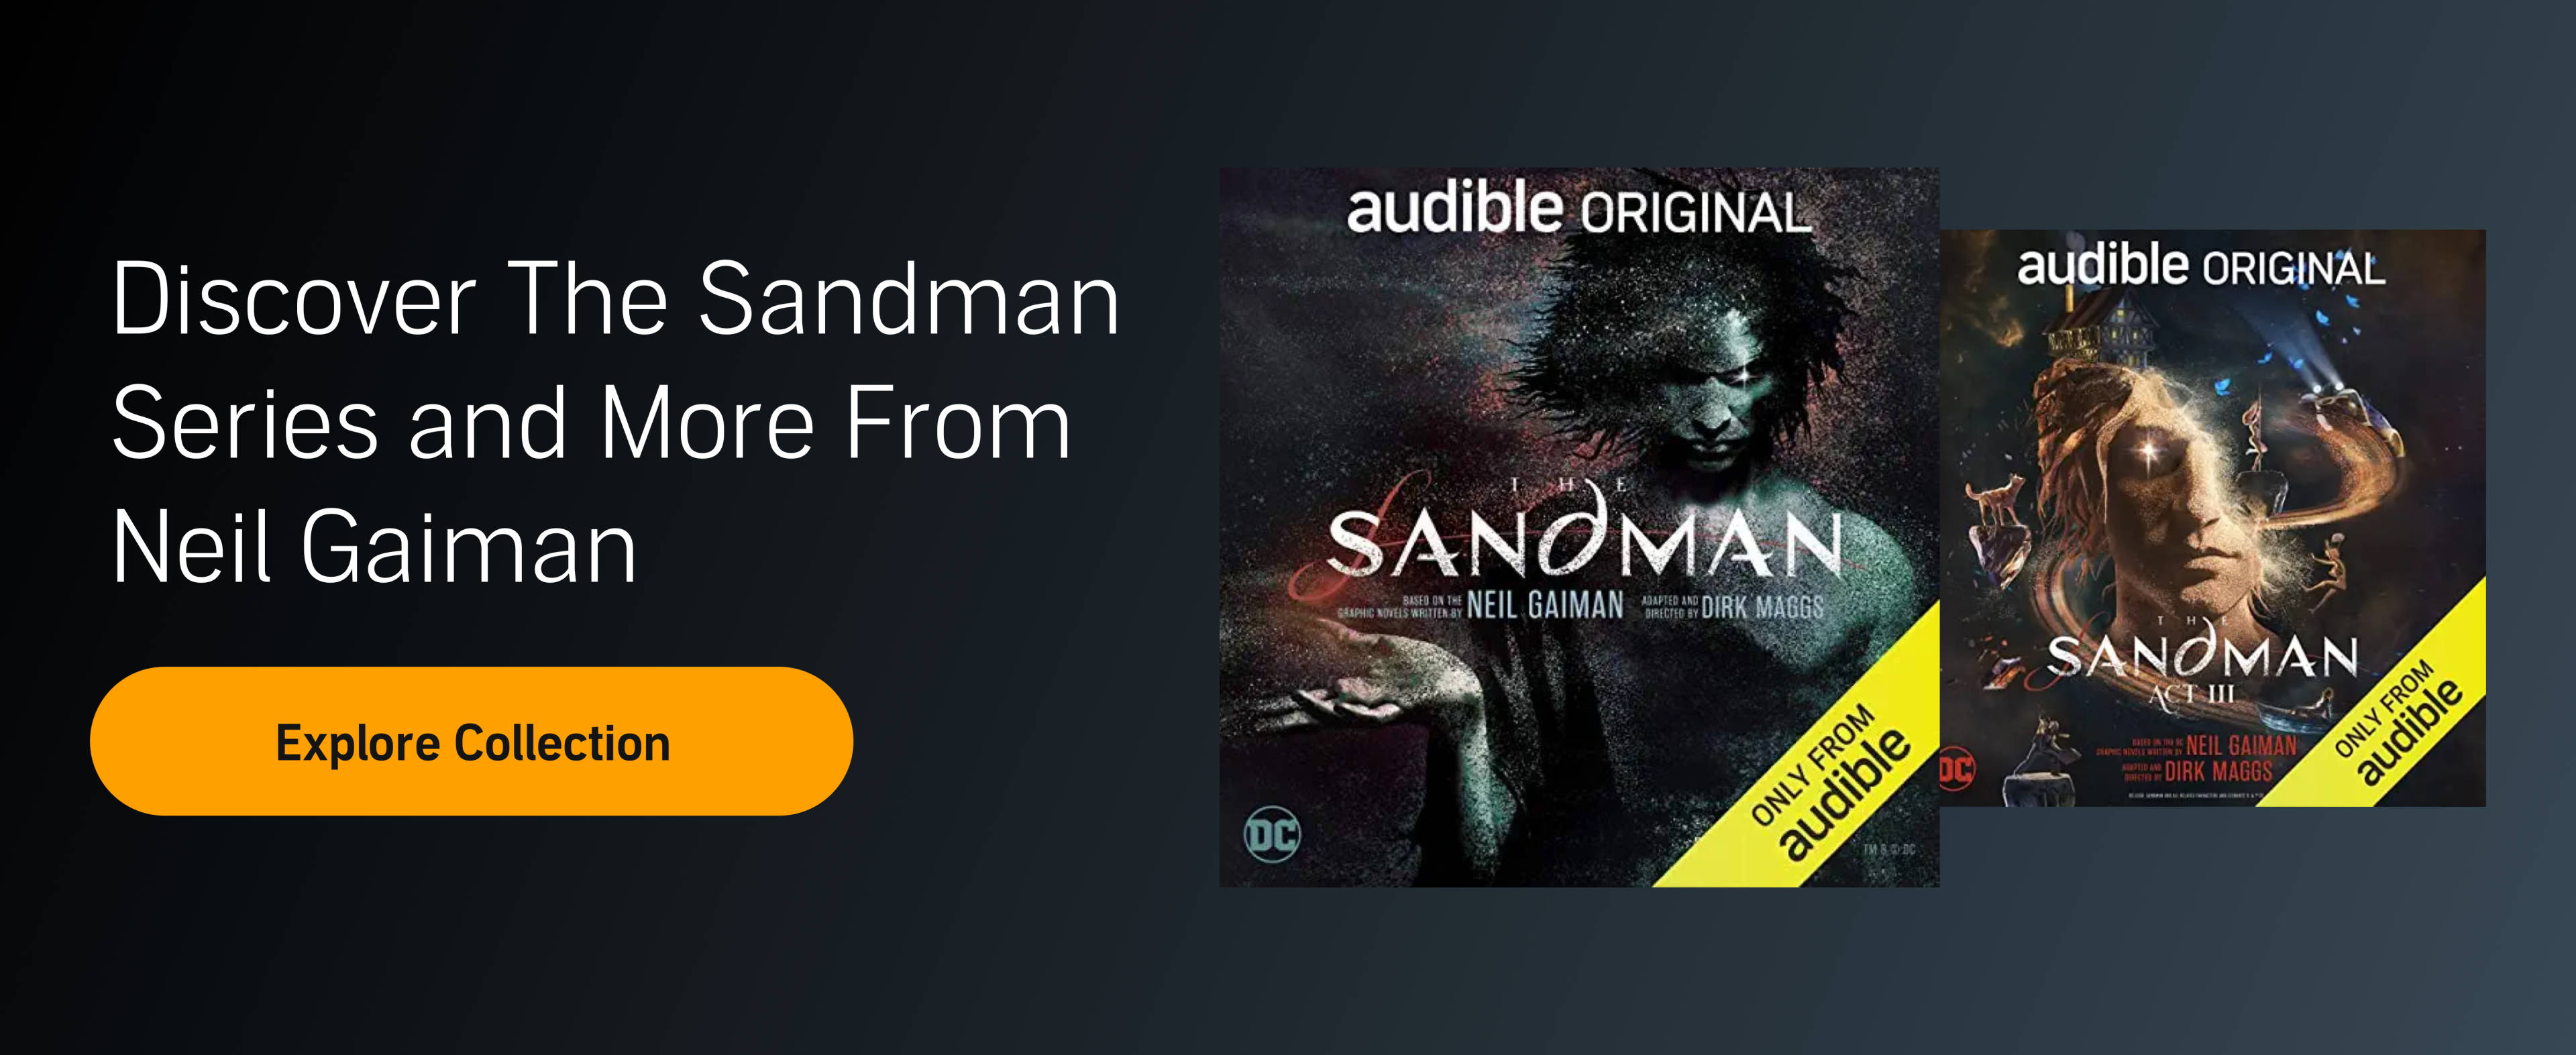 Explore the collection and discover The Sandman series and more from Neil Gaiman